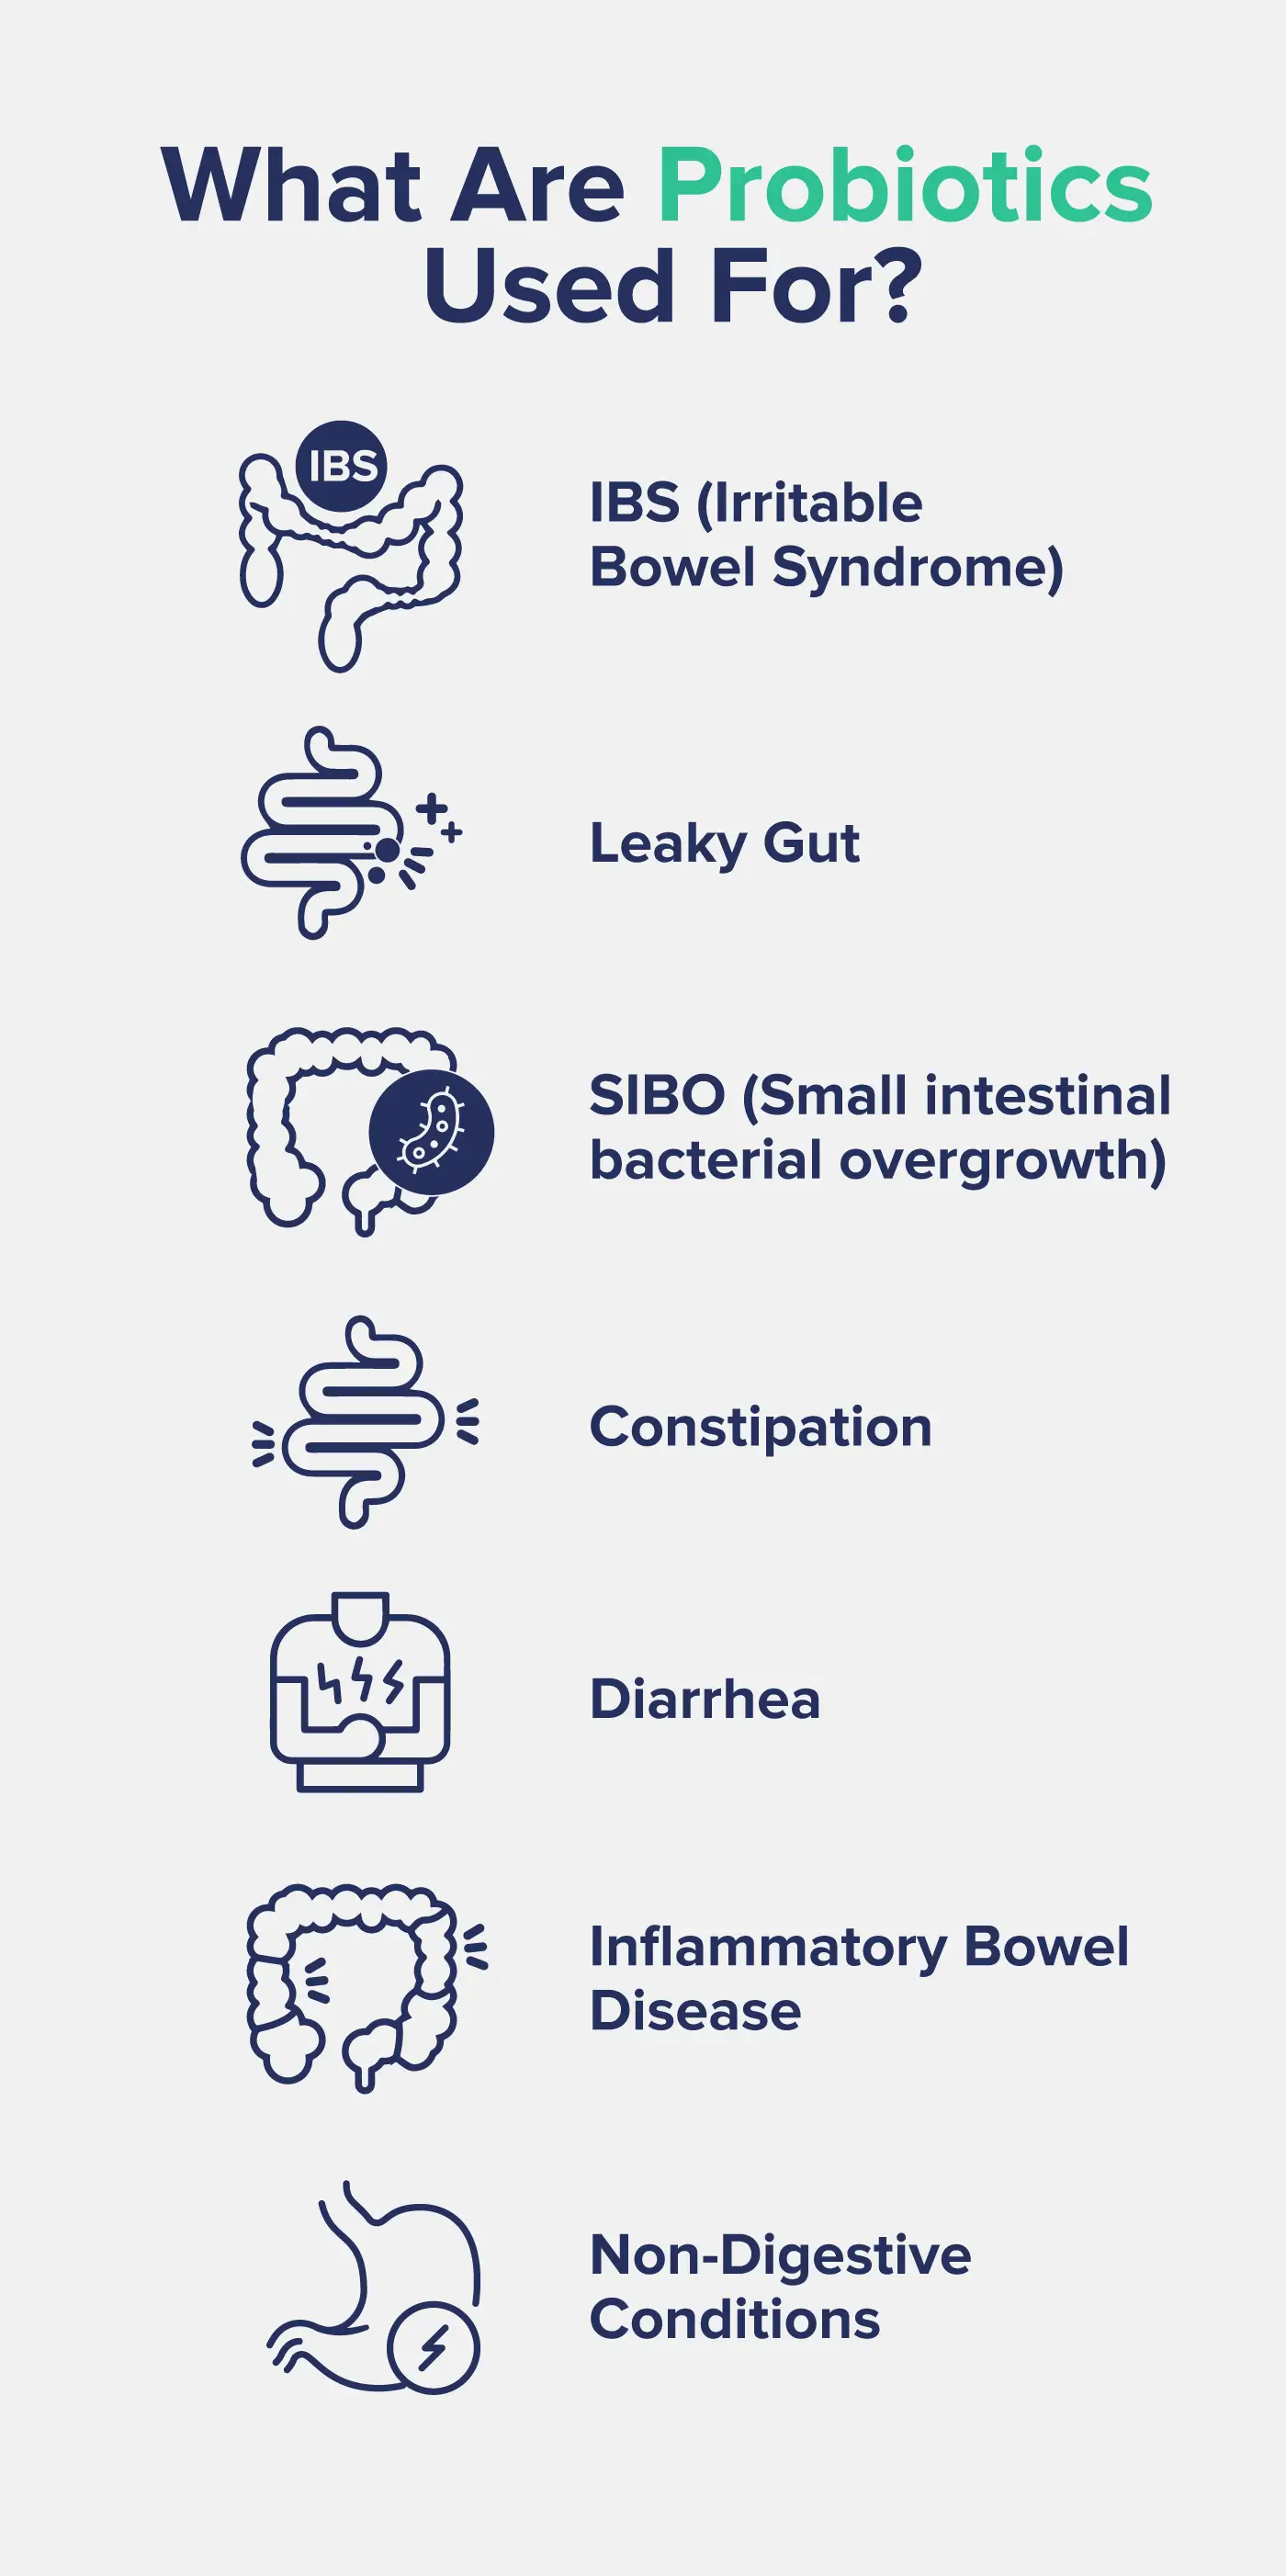 What are probiotics used for?